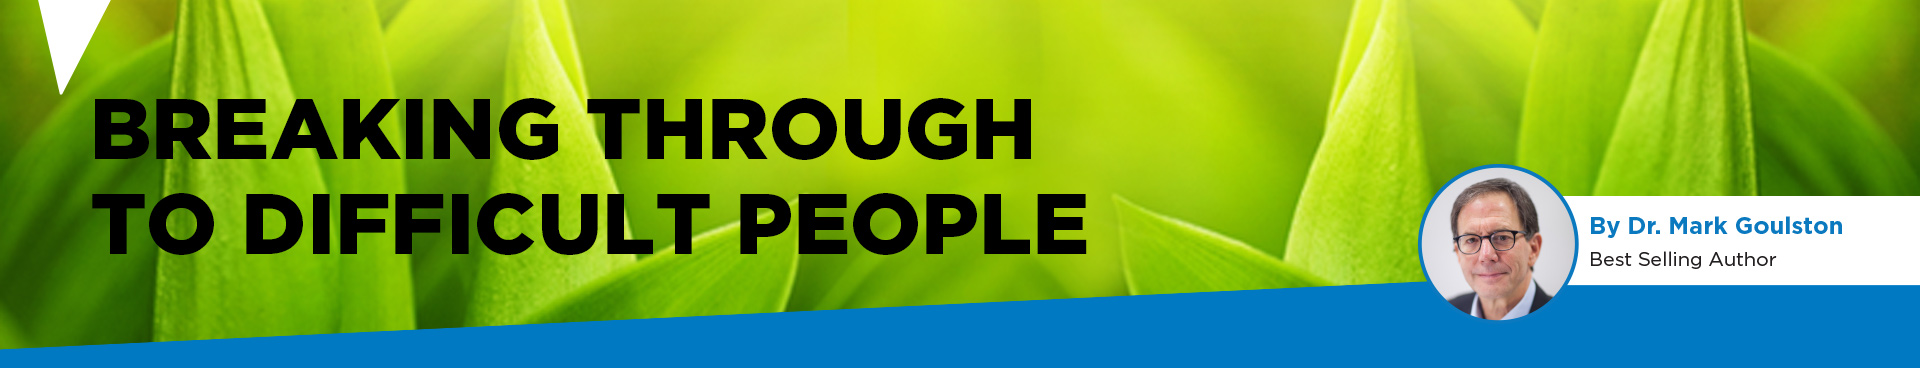 banner for breaking through to difficult people article